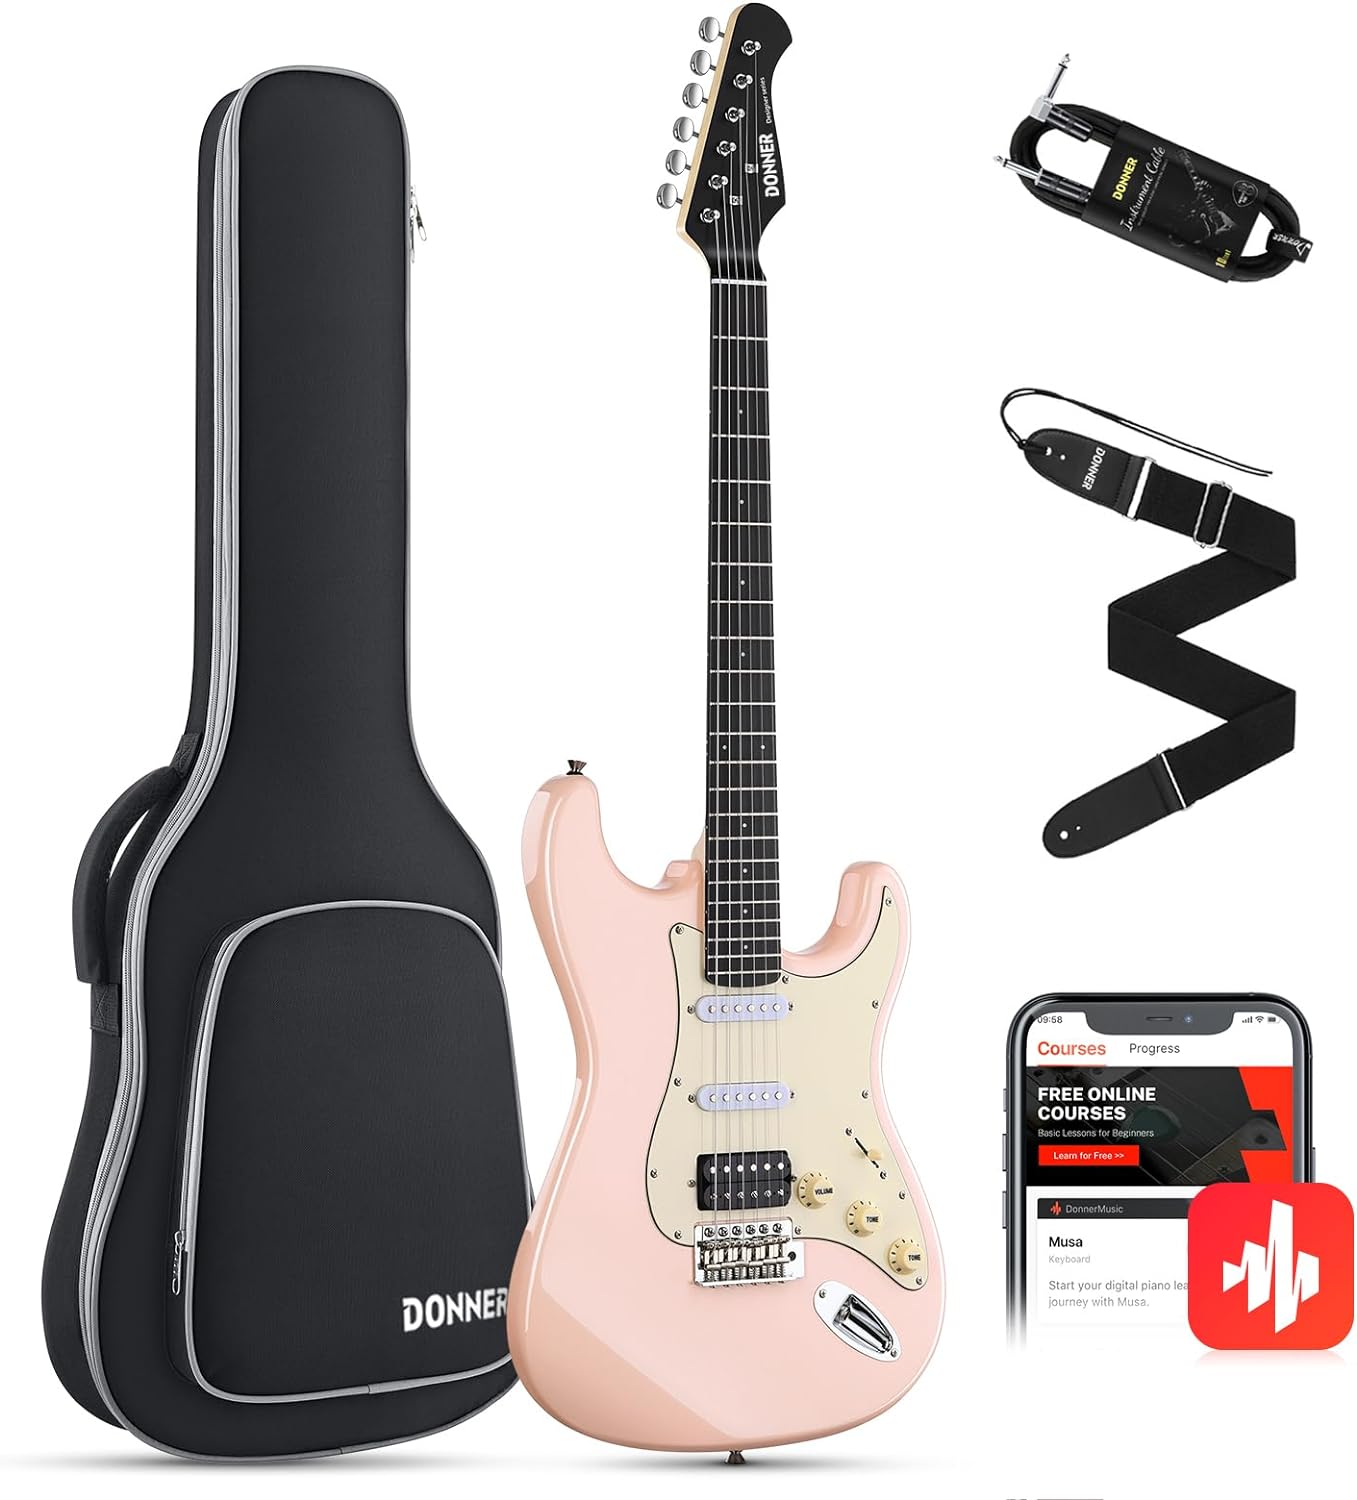 Donner 39 Inch Electric Guitar, Designer Series DST-200 Stylish Solid Body Electric Guitar for Beginner Intermediate & Pro Players, Single Coil Split System, Bonus Bag, Cable, Strap - image 1 of 8